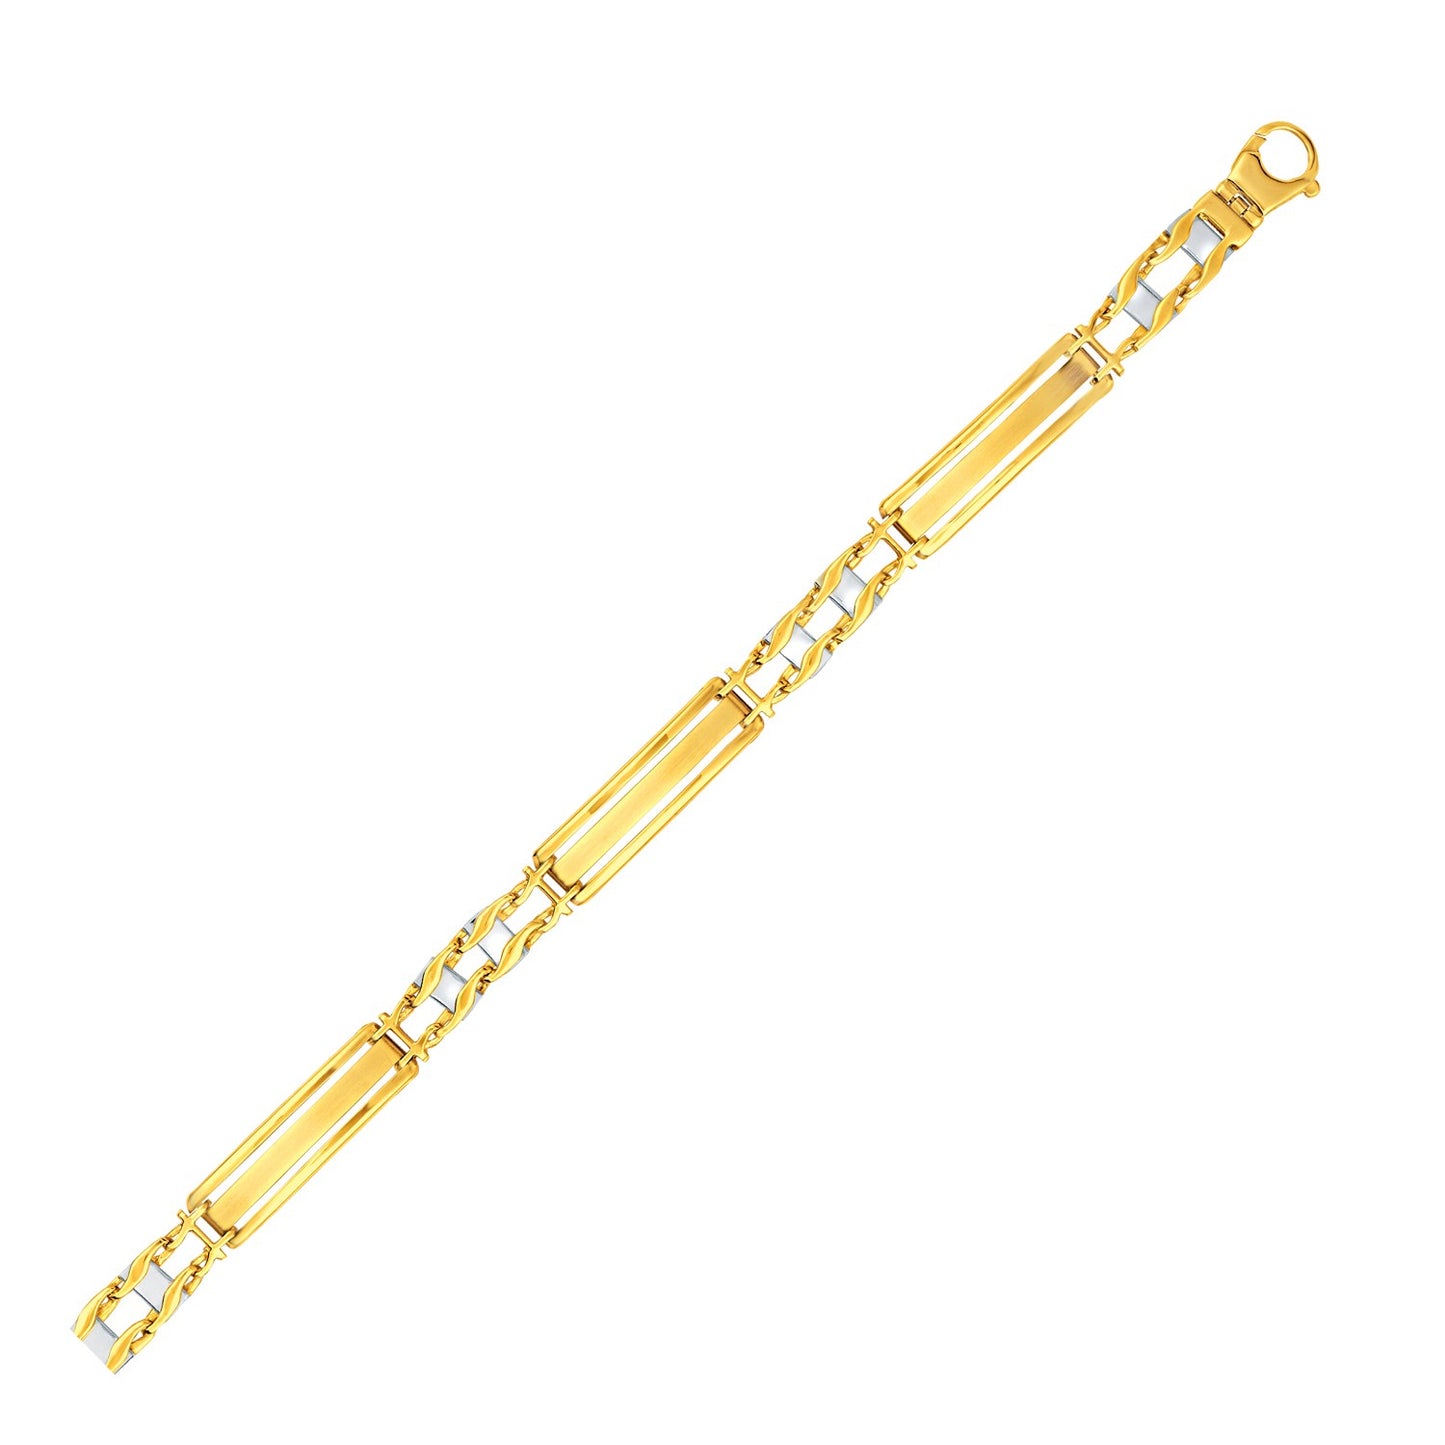 14k Two-Tone Gold Fancy Bar Style Mens Bracelet with Curved Connectors (9.65 mm)